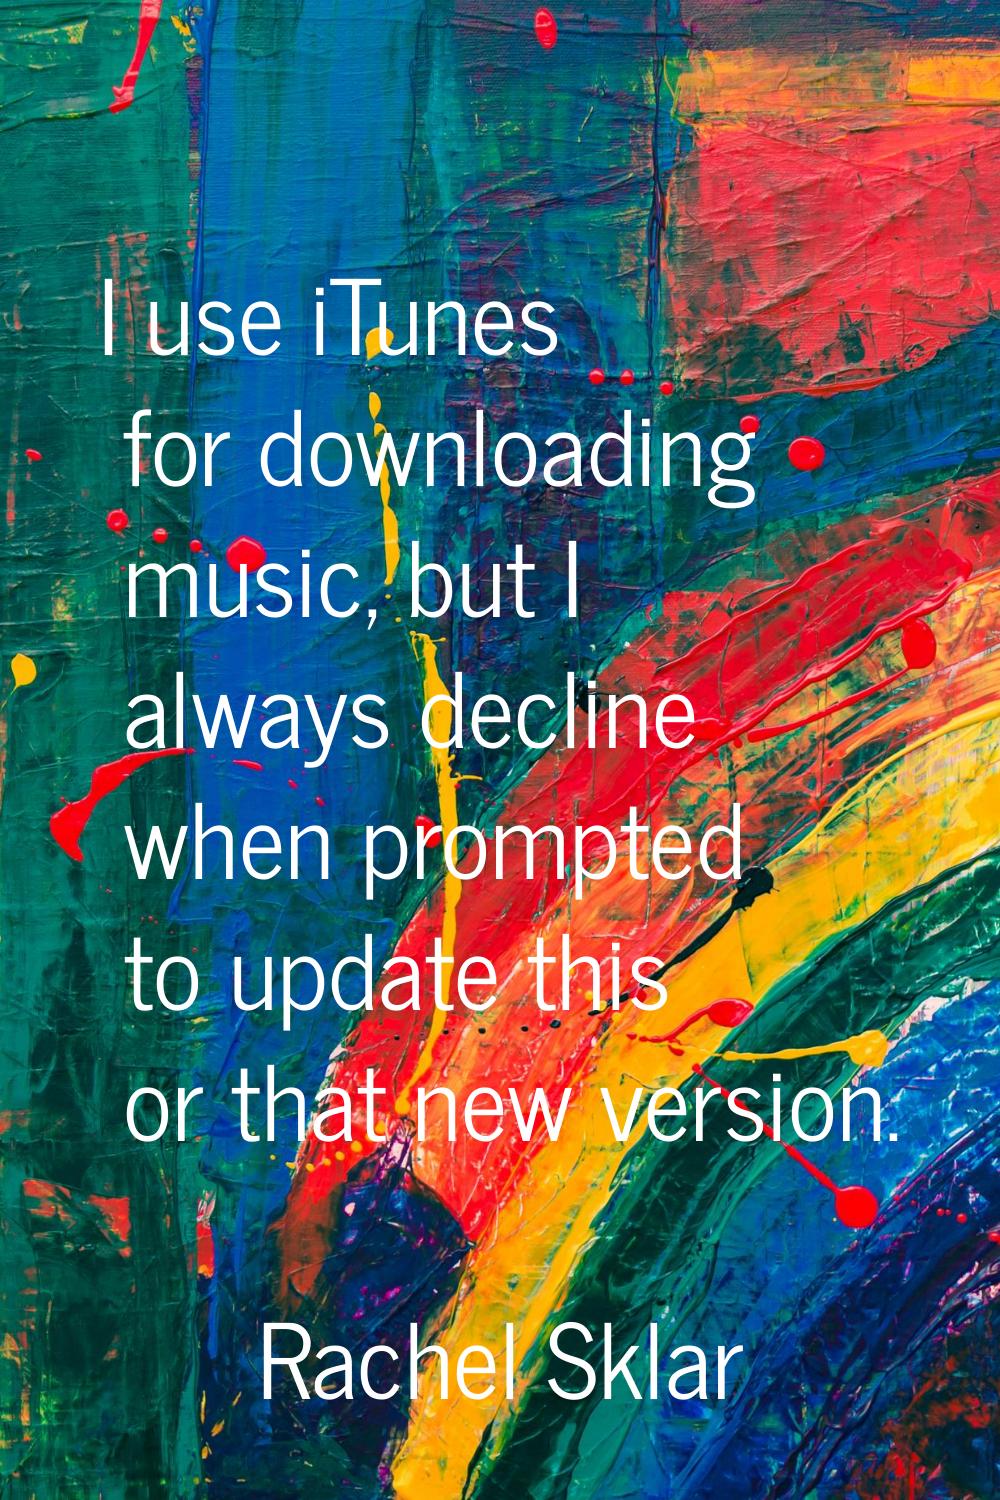 I use iTunes for downloading music, but I always decline when prompted to update this or that new v